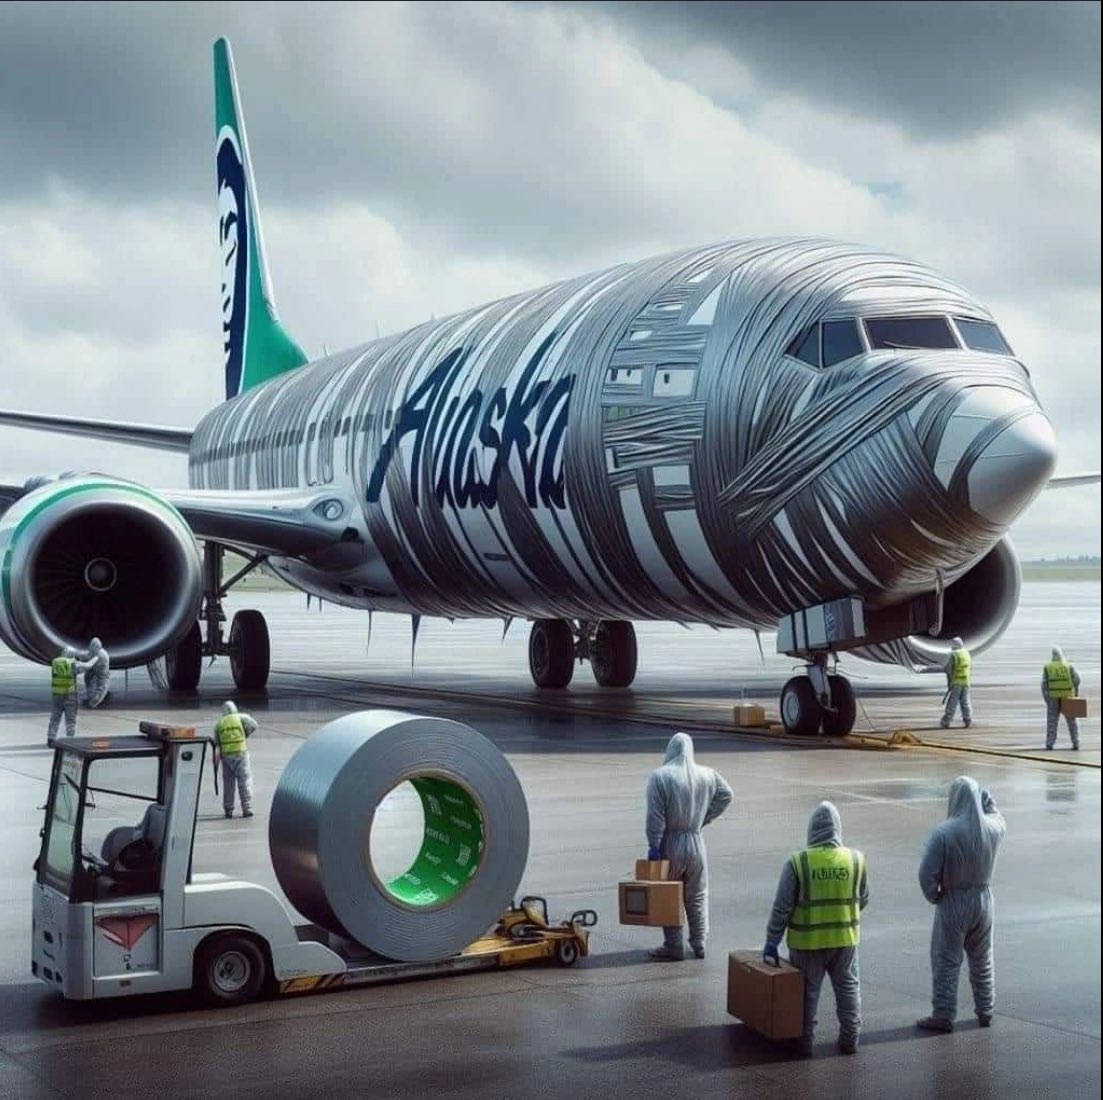 WHO DID THIS?! #737 #ducttape